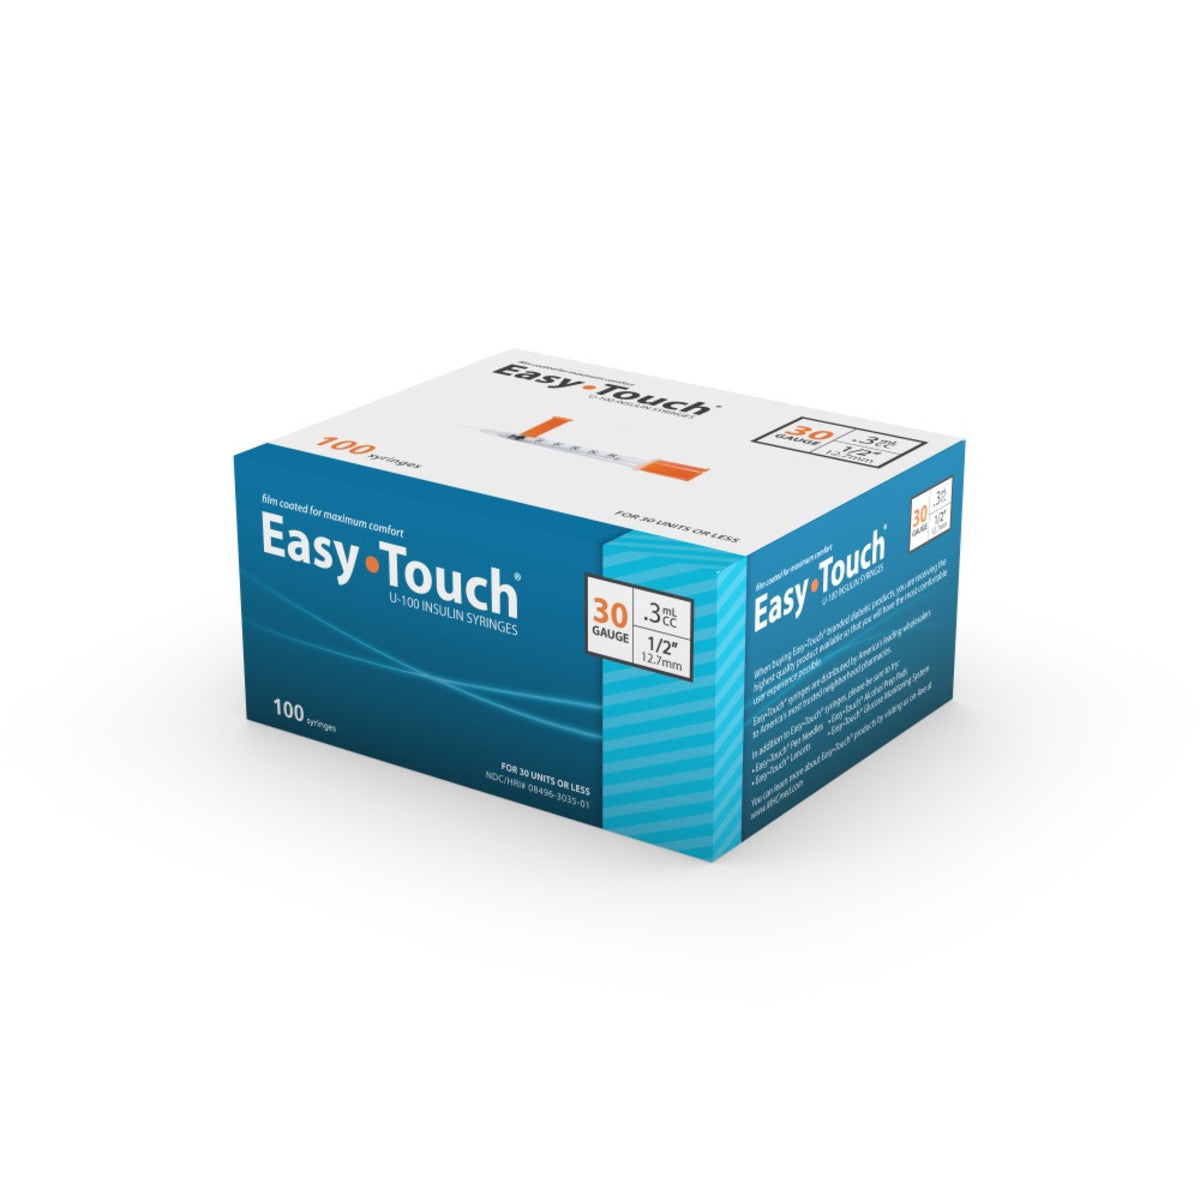 Easy Touch Insulin Syringe, 30G .3cc 1/2-Inch (12.7mm), 830355, Box of 100